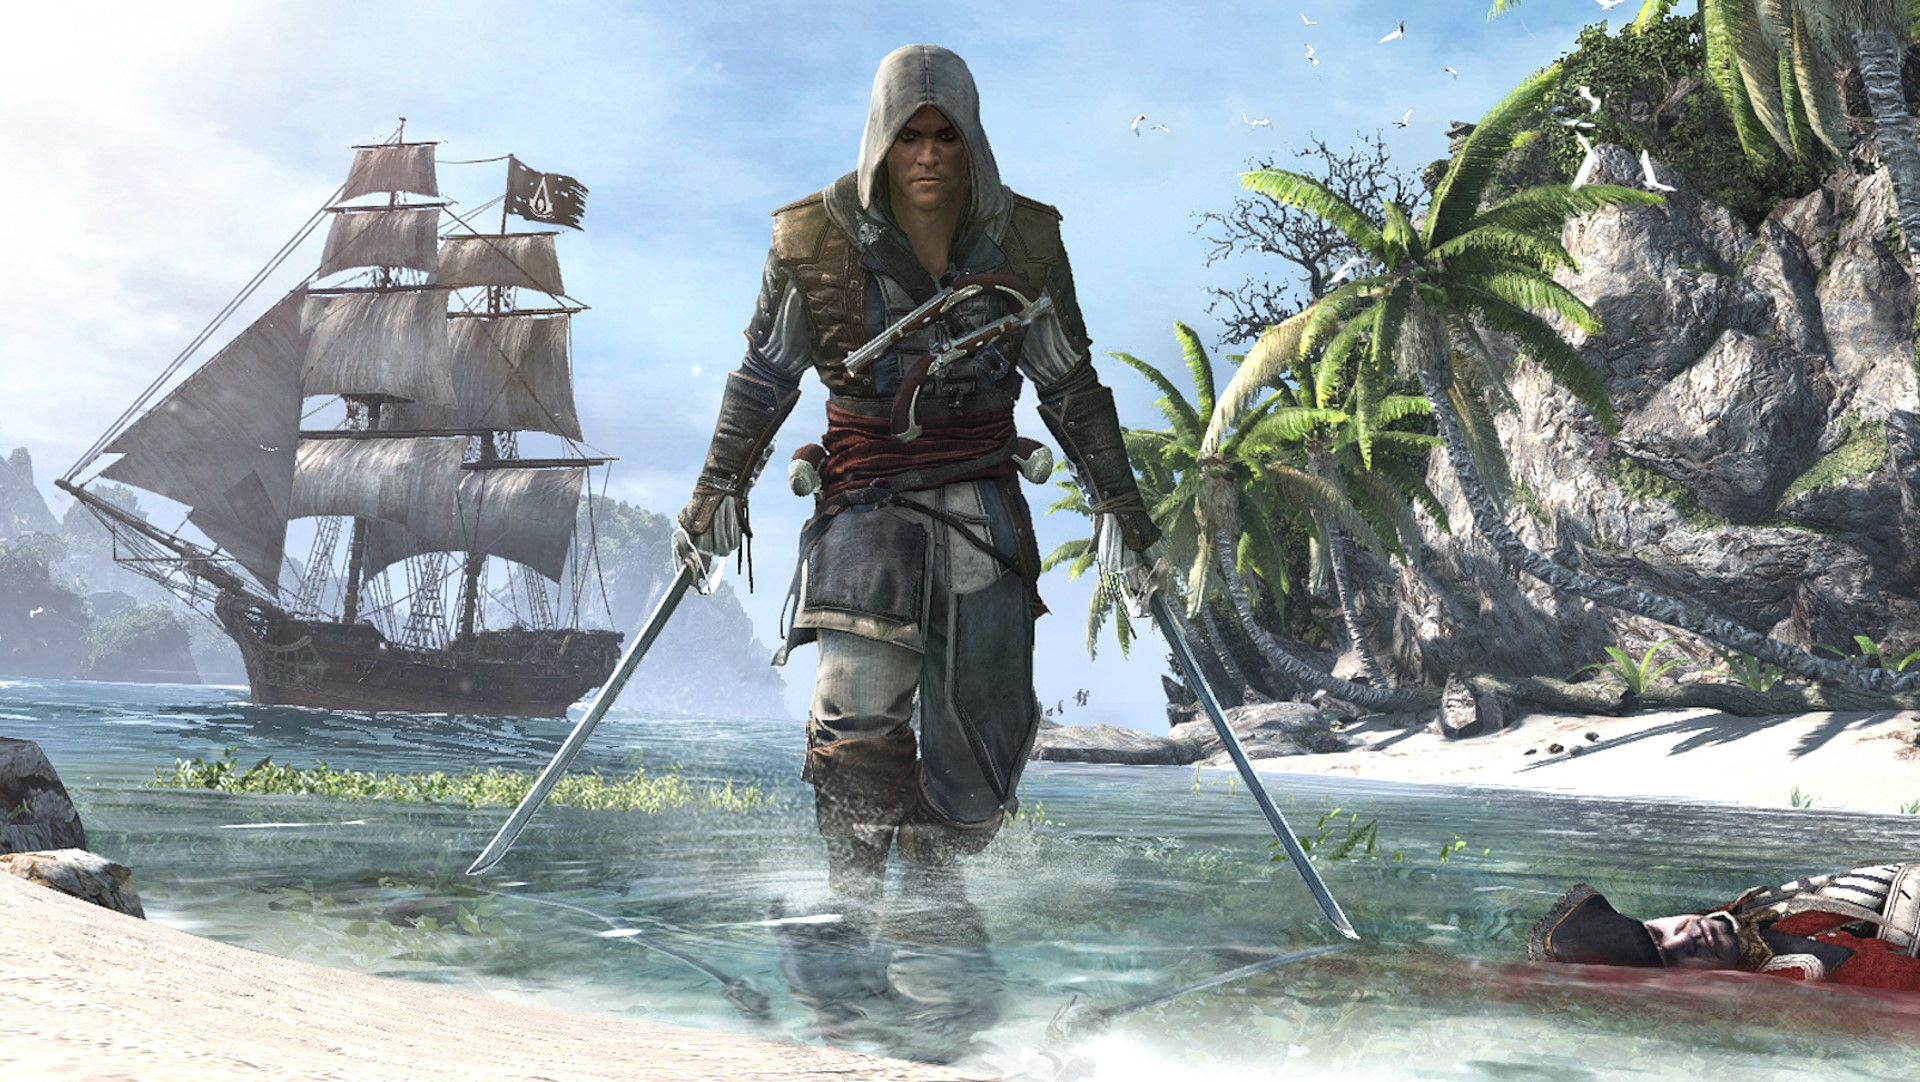 Assassin's Creed 2023™ (Free To Play) 